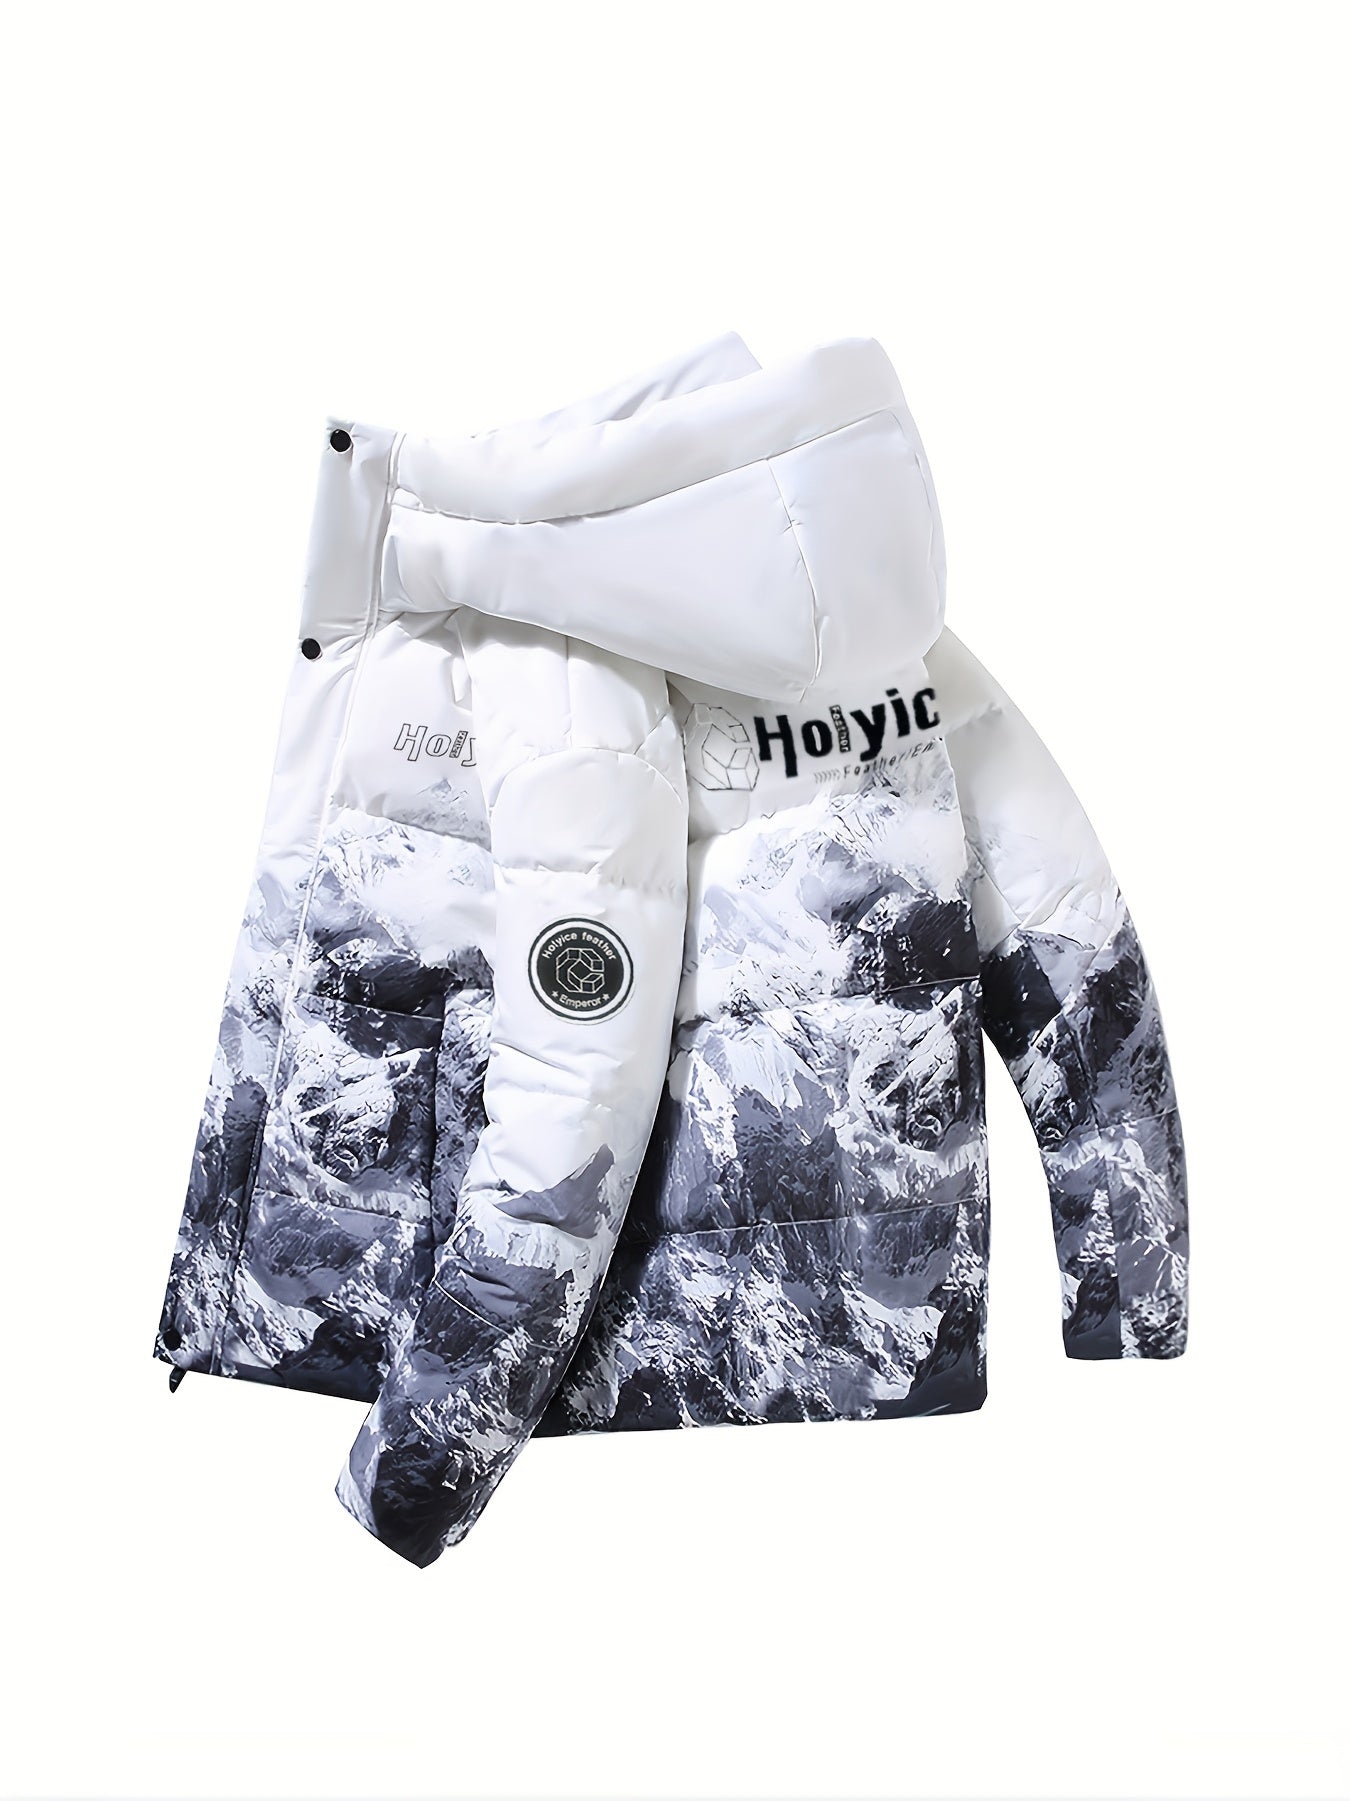 Mountain Printed Zipper Hooded Jacket, Casual Long Sleeve Winter Outerwear, Women's Clothing